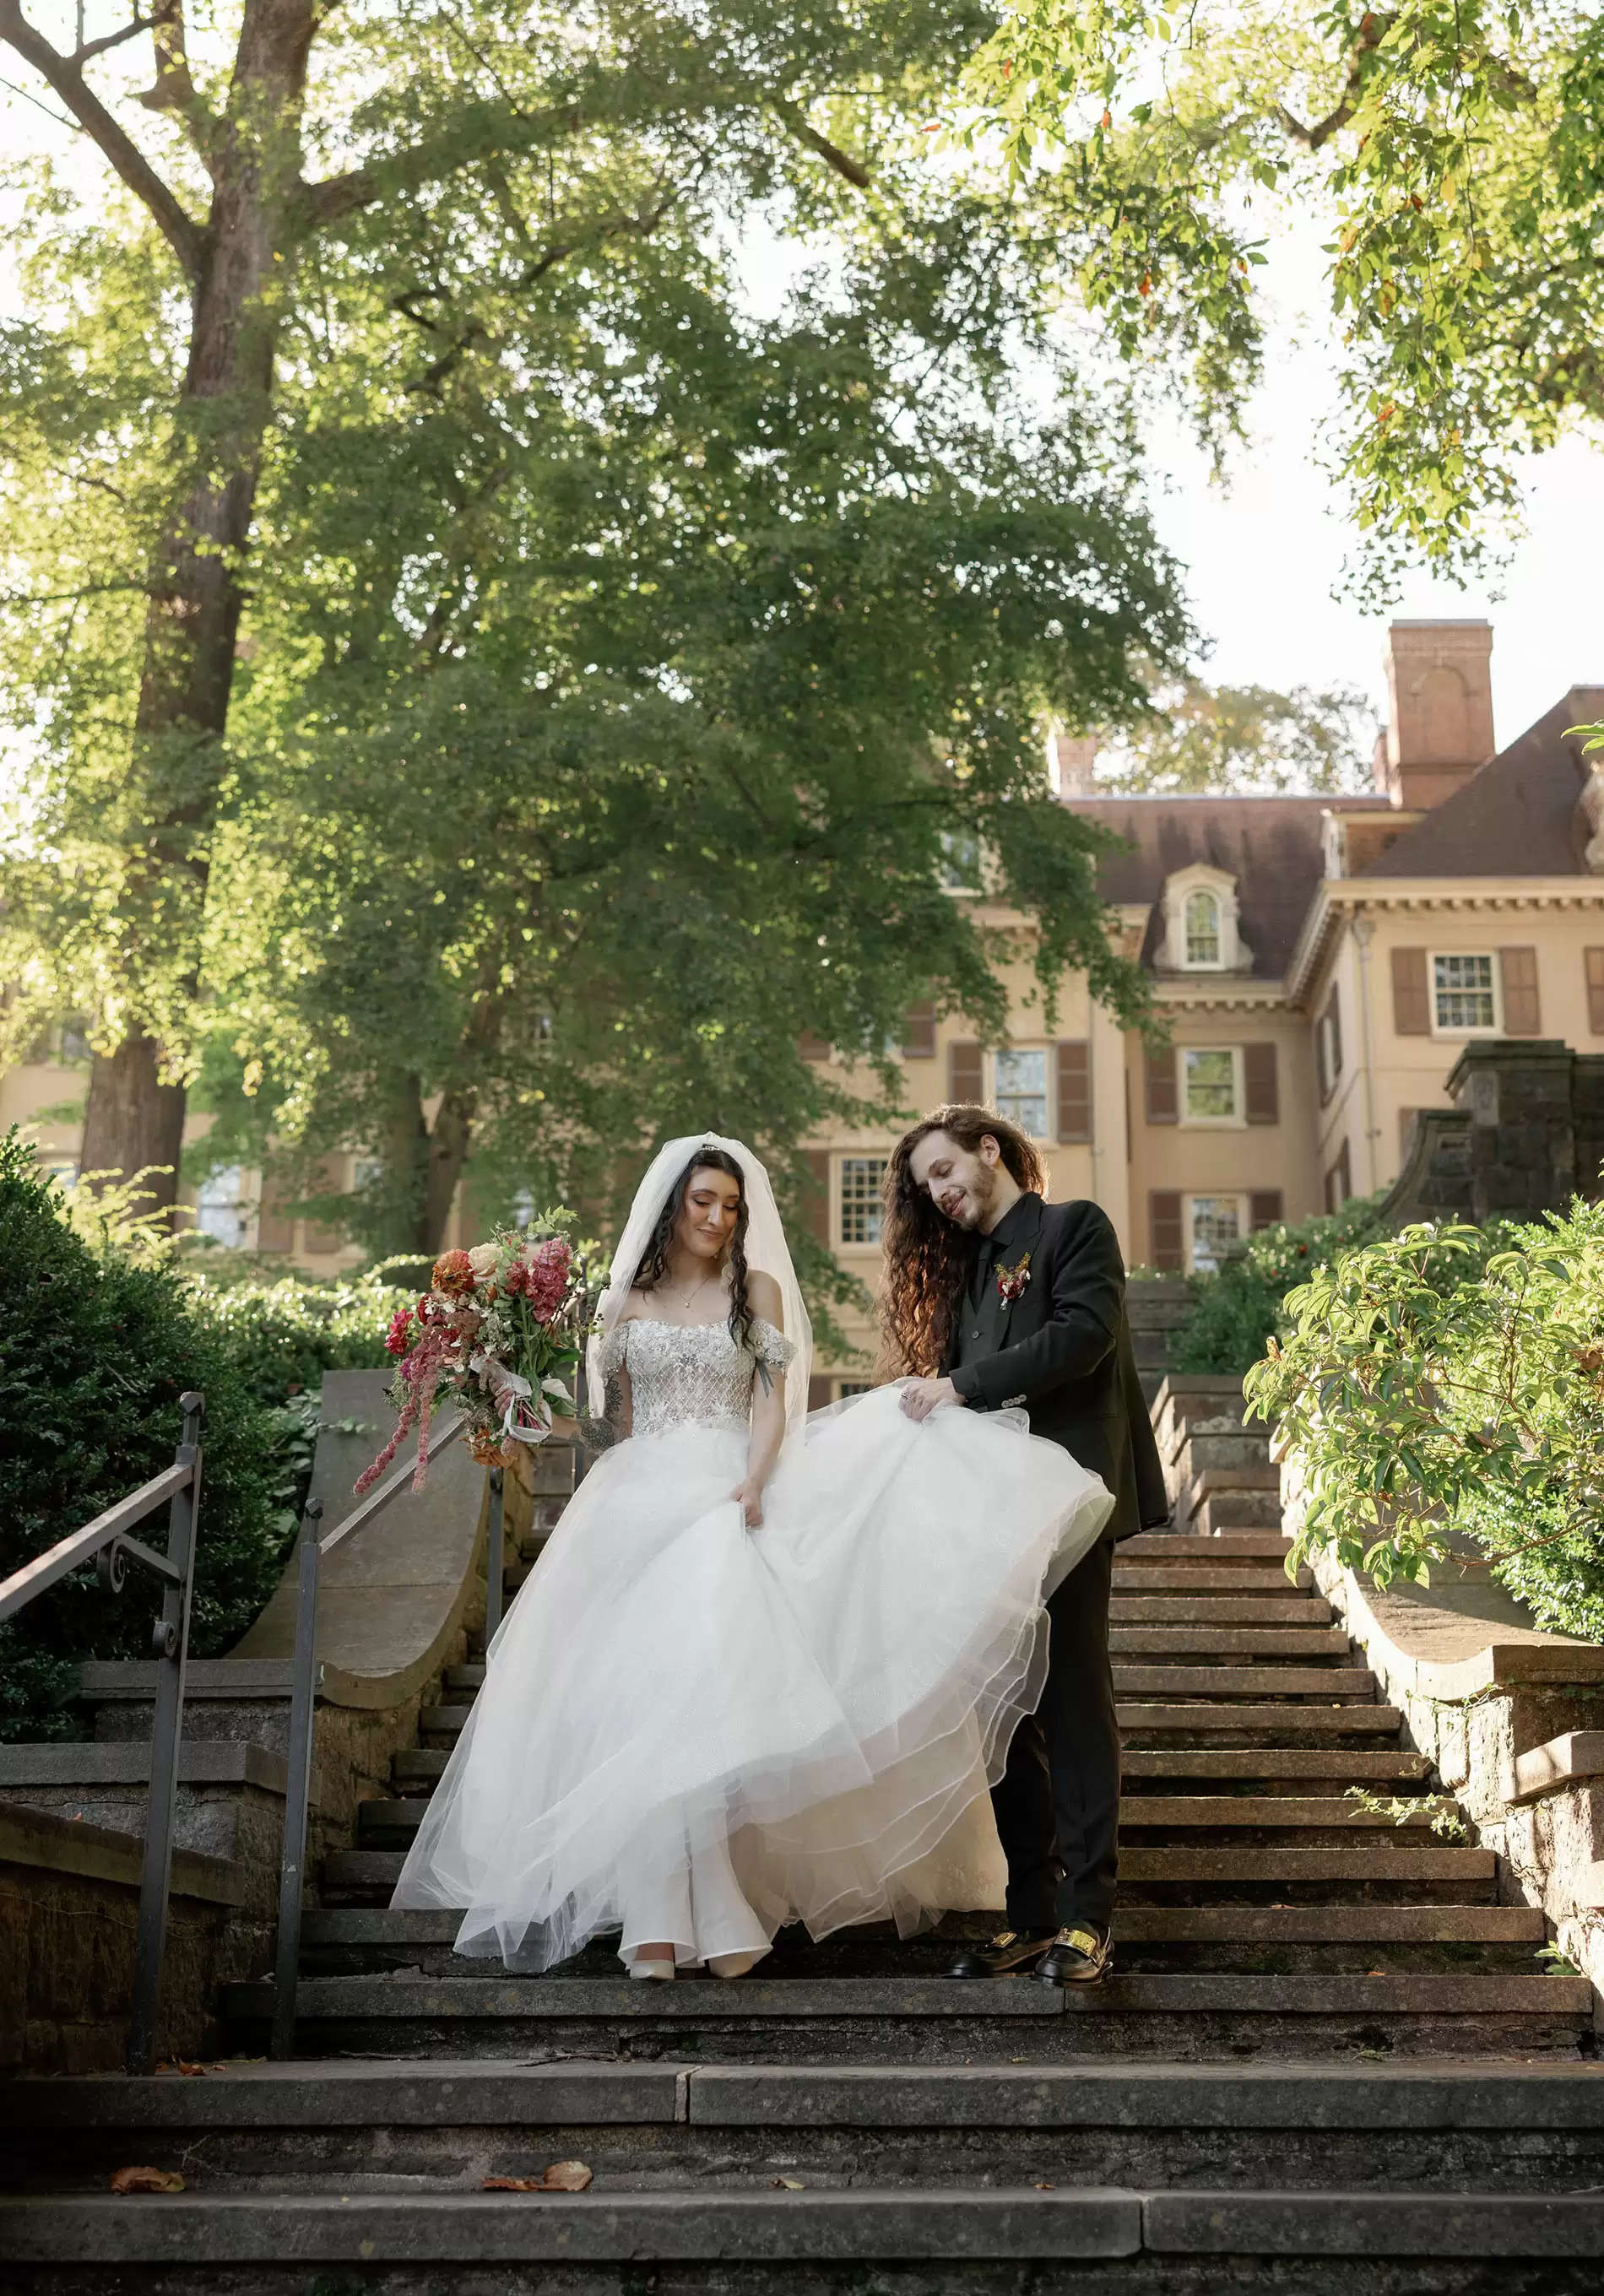 Ethereal Class + Edge for Two DJs' Fall Fairytale Wedding ceremony